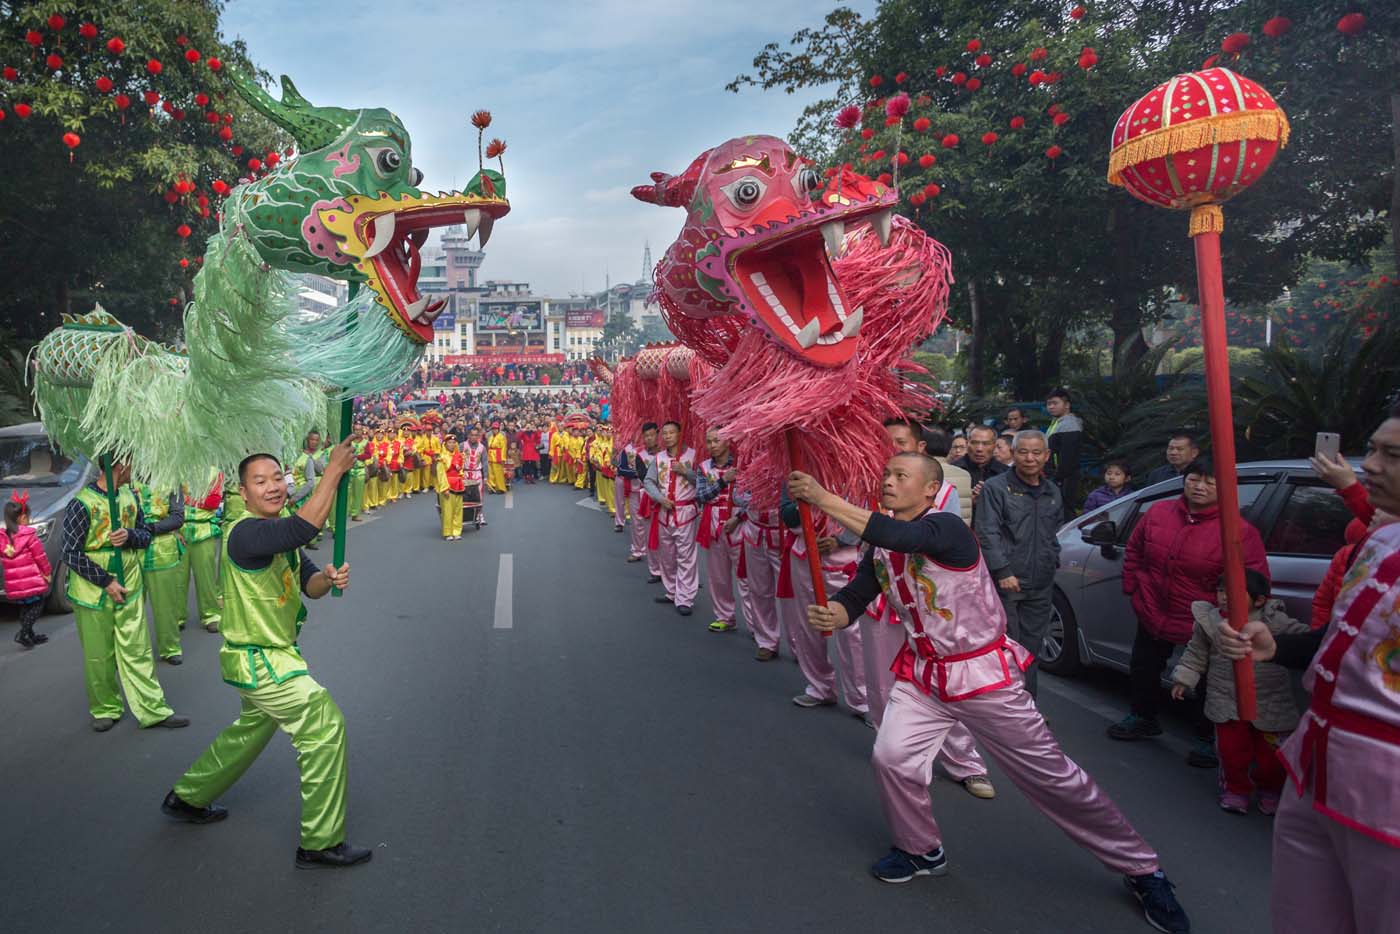 People perform a dragon dance to celebrate China's Lunar New Year in Dabu County, Guangdong province, China, January 28, 2017. REUTERS/Stringer ATTENTION EDITORS - THIS IMAGE WAS PROVIDED BY A THIRD PARTY. EDITORIAL USE ONLY. CHINA OUT.